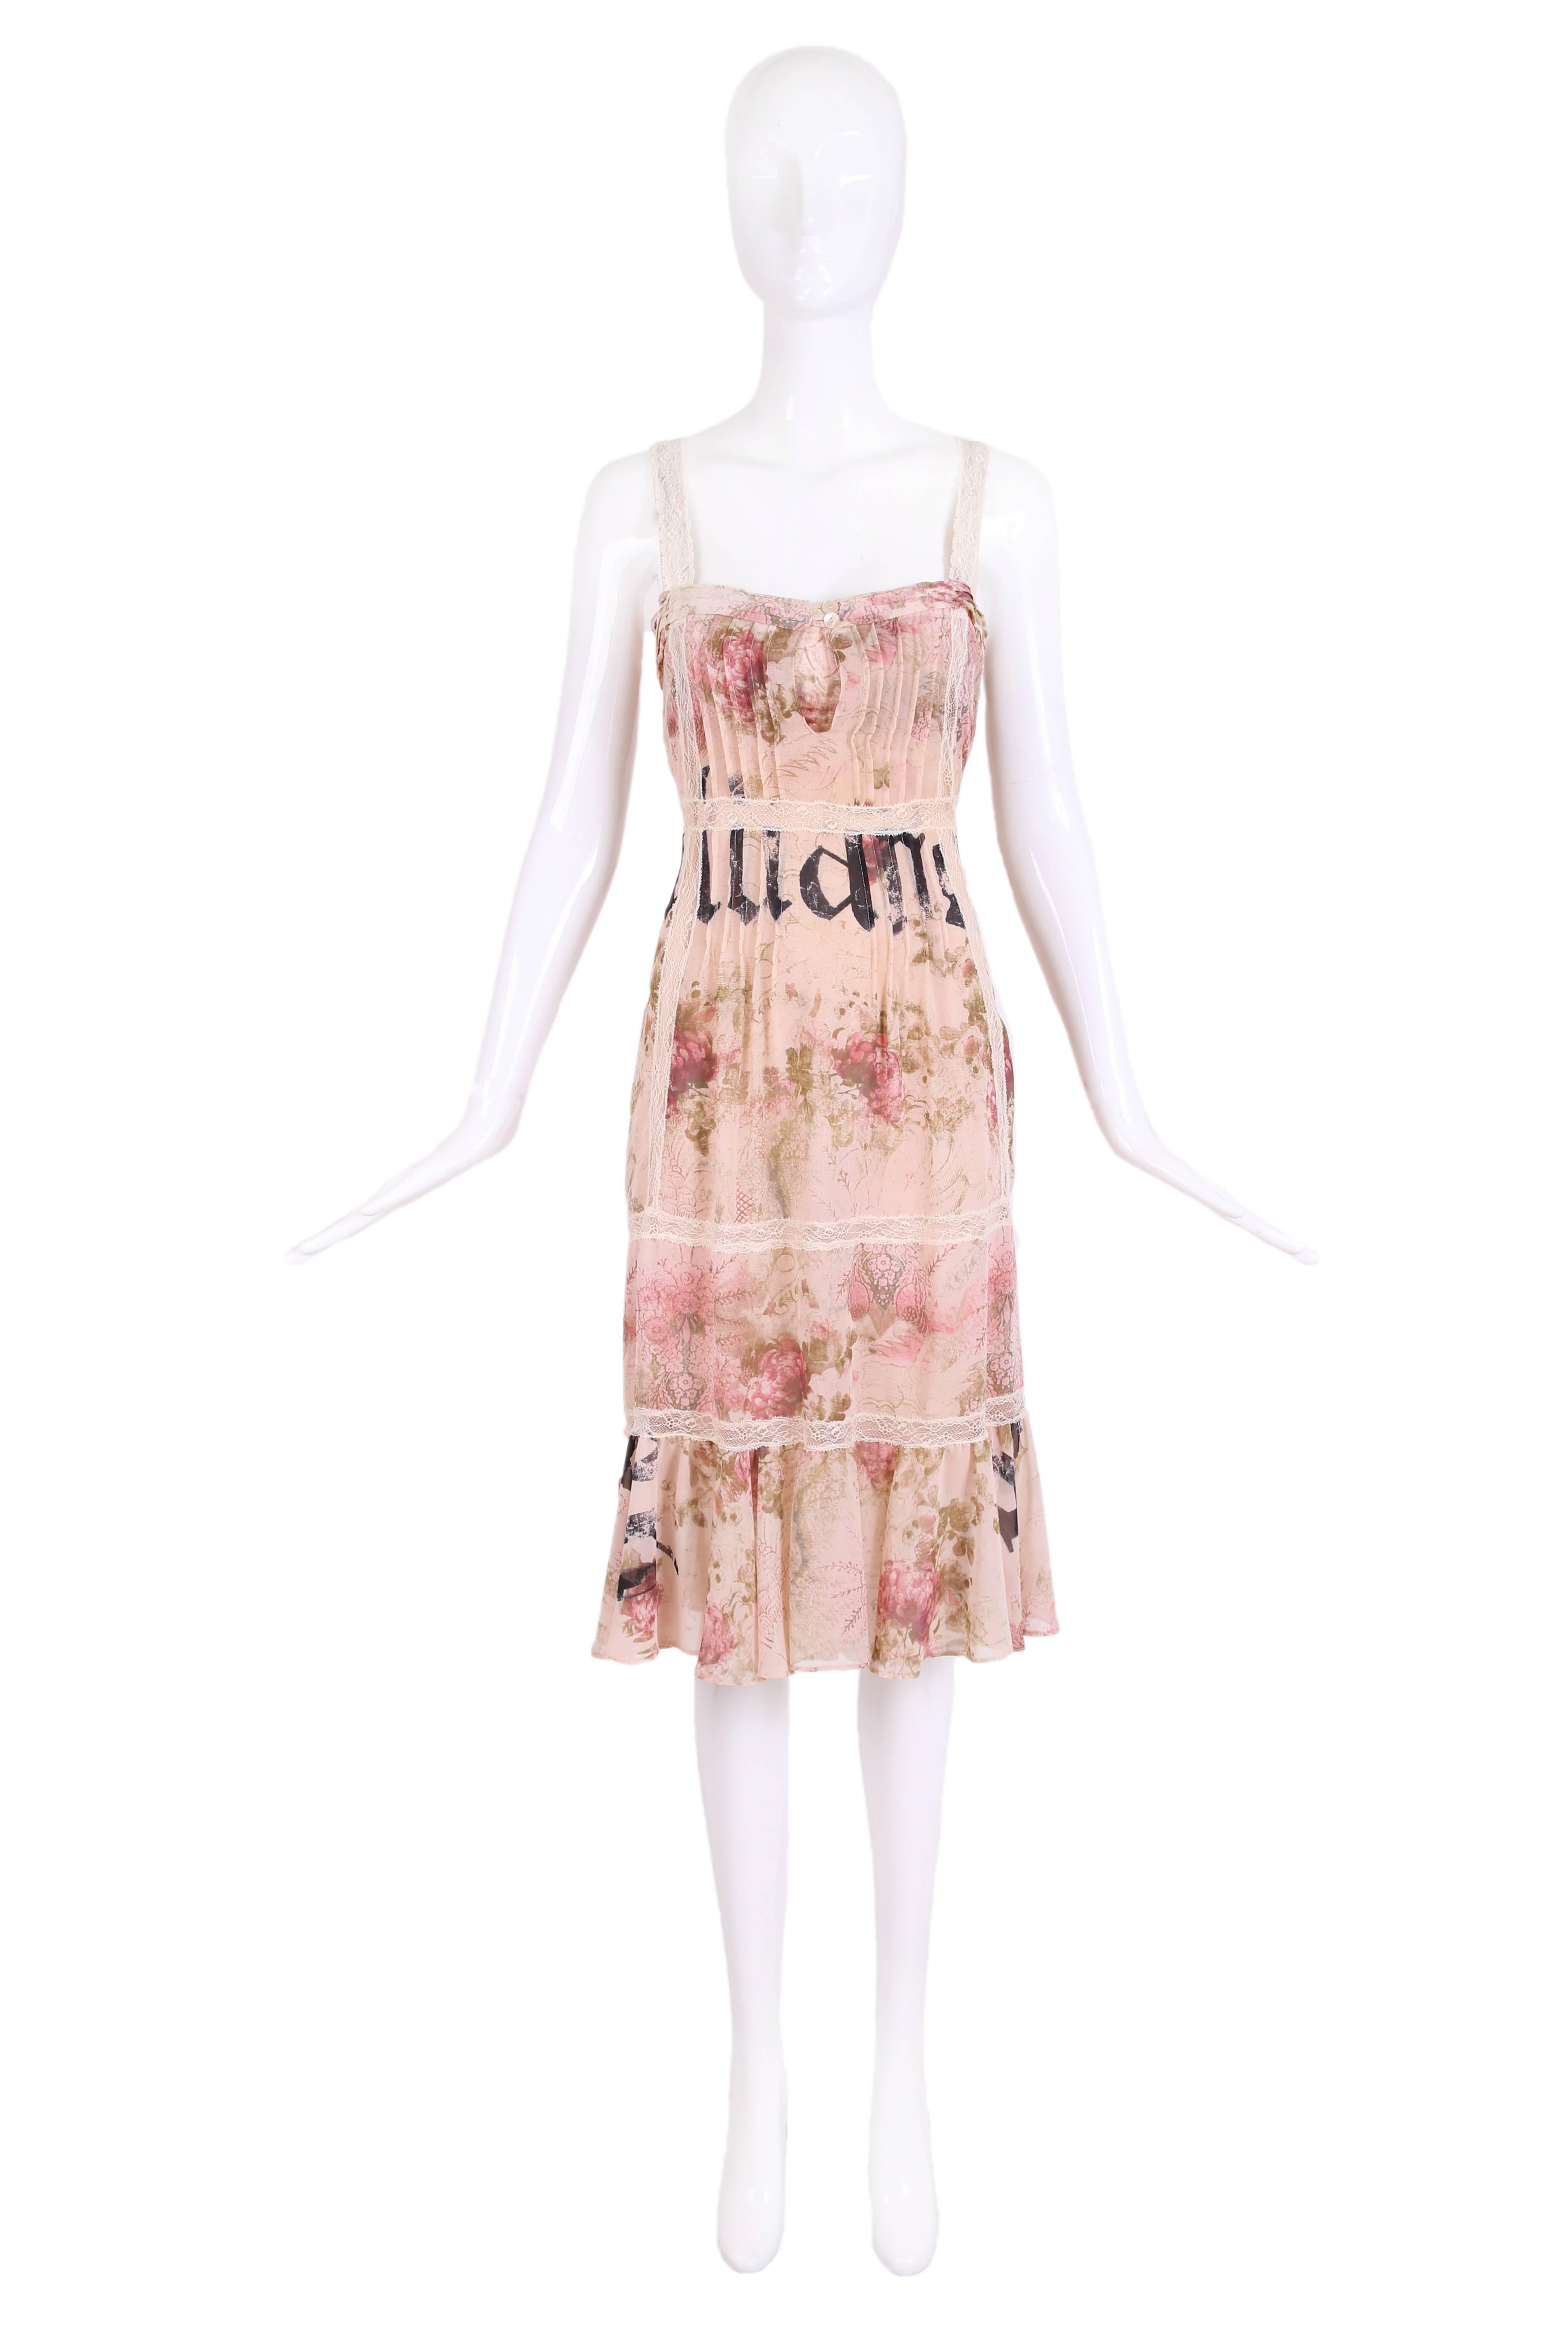 John Galliano rayon floral and signature dress with built in bra. Dress has cream lace insets, pintuck detailing and a soft ruffle flounce hem. In excellent condition. Size 40.